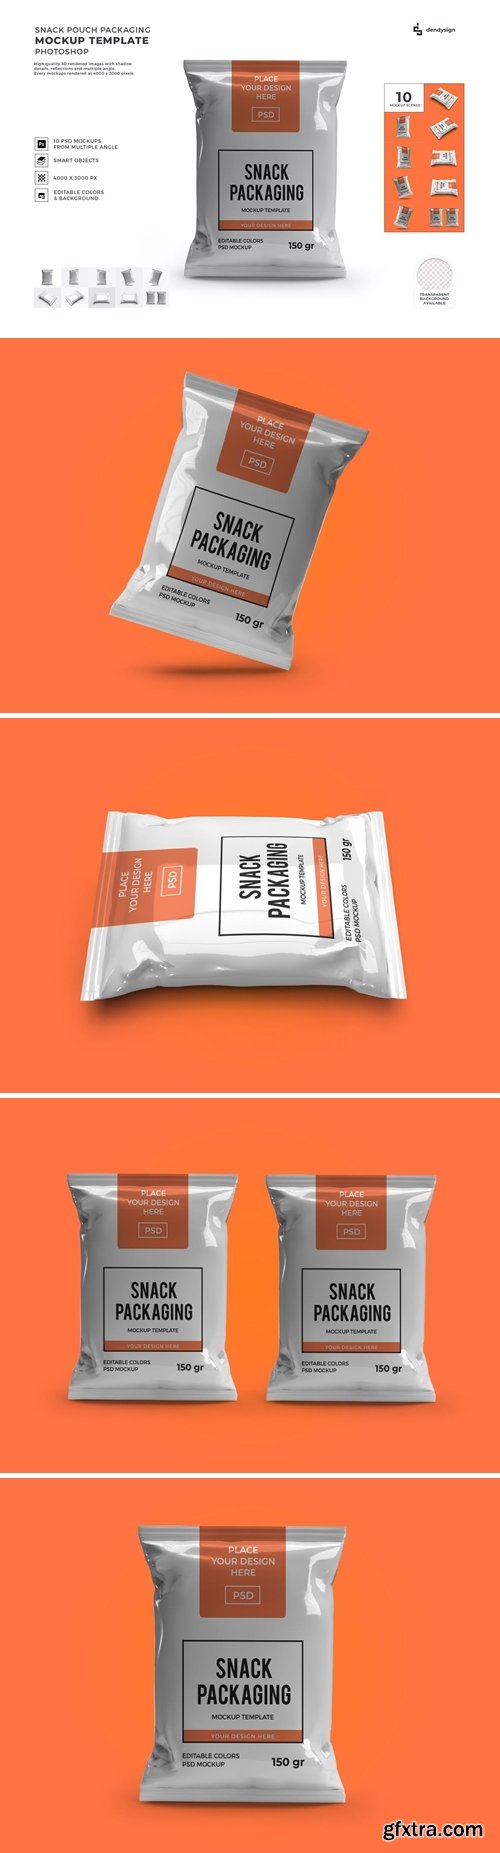 Snack Pouch Packaging Mockup Template Set